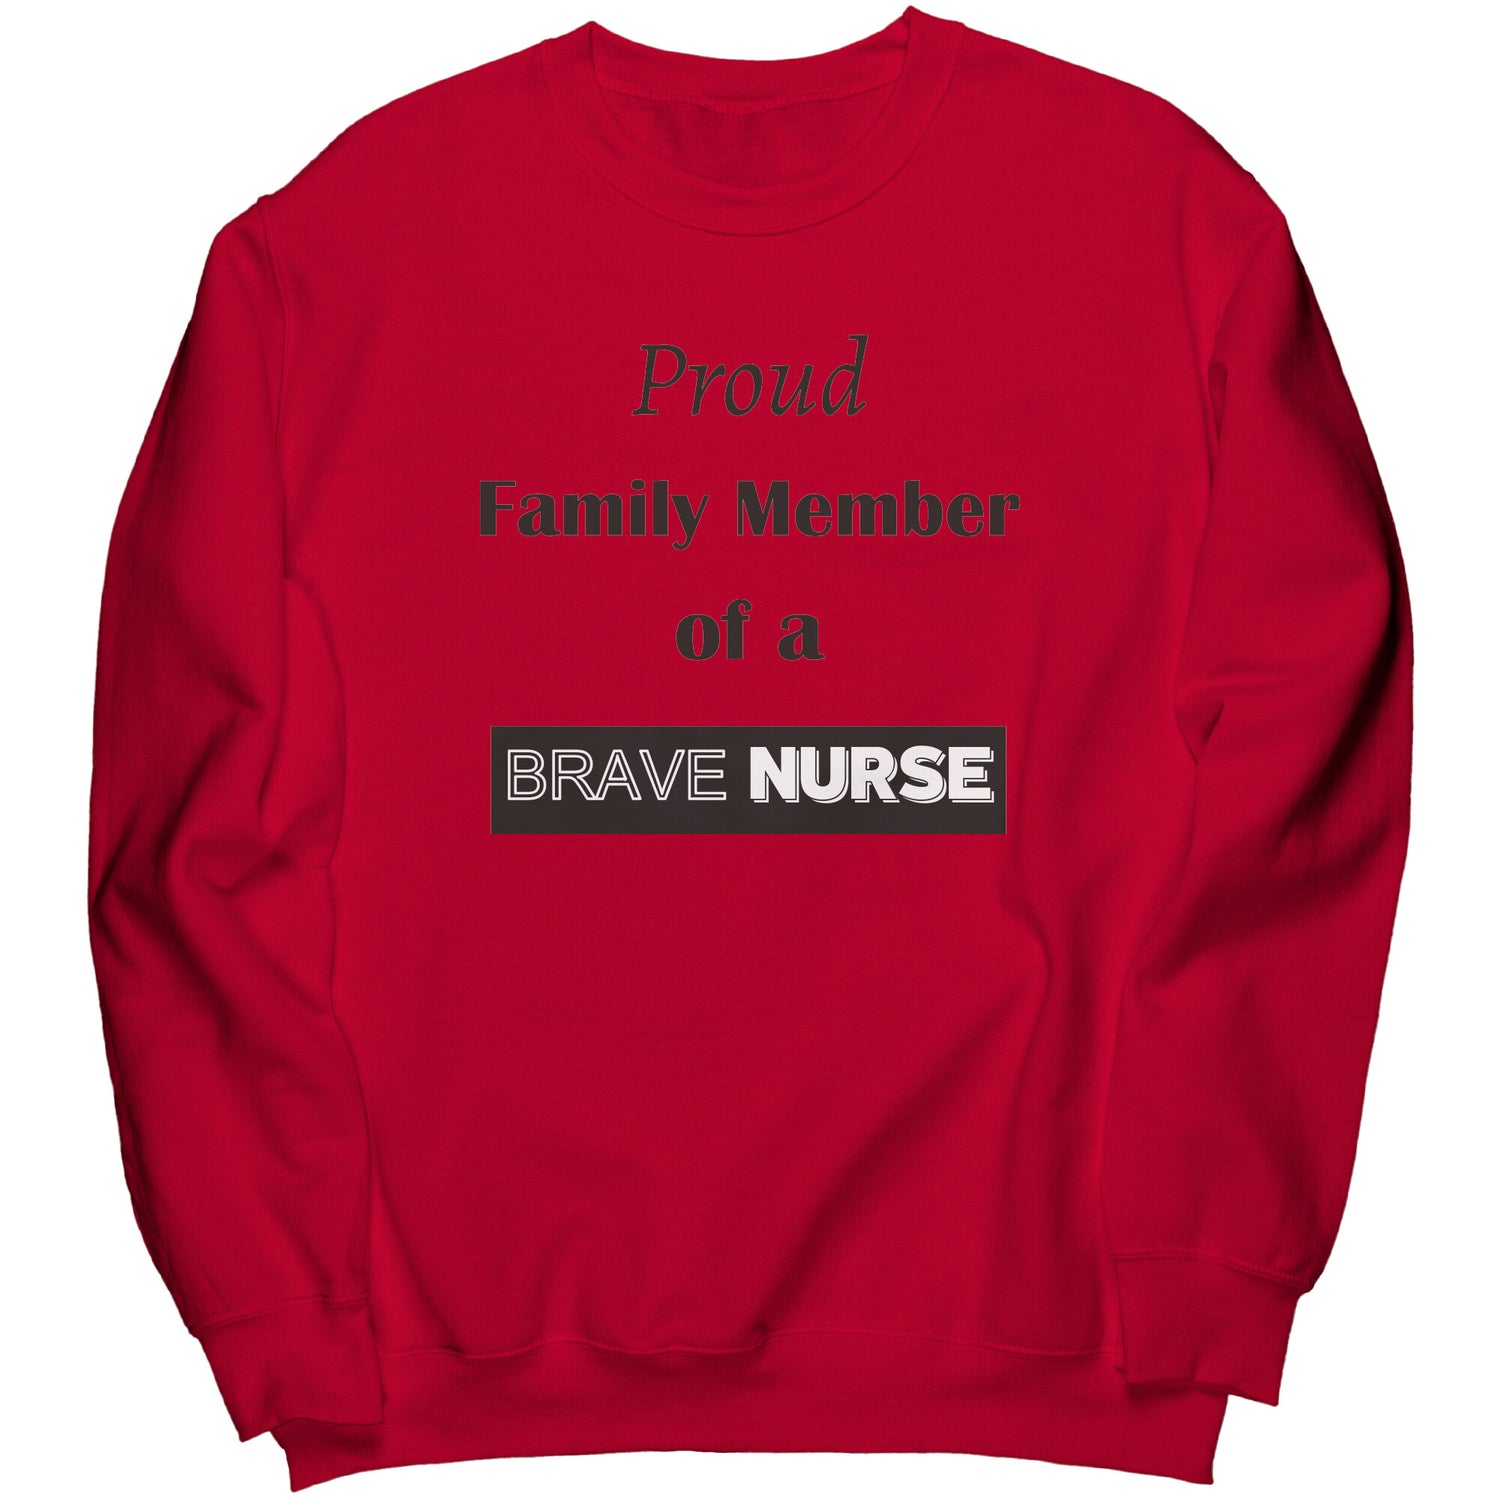 Proud Family Member of a Brave Nurse Lettering Sweatshirt - Signs and Seasons Gifts